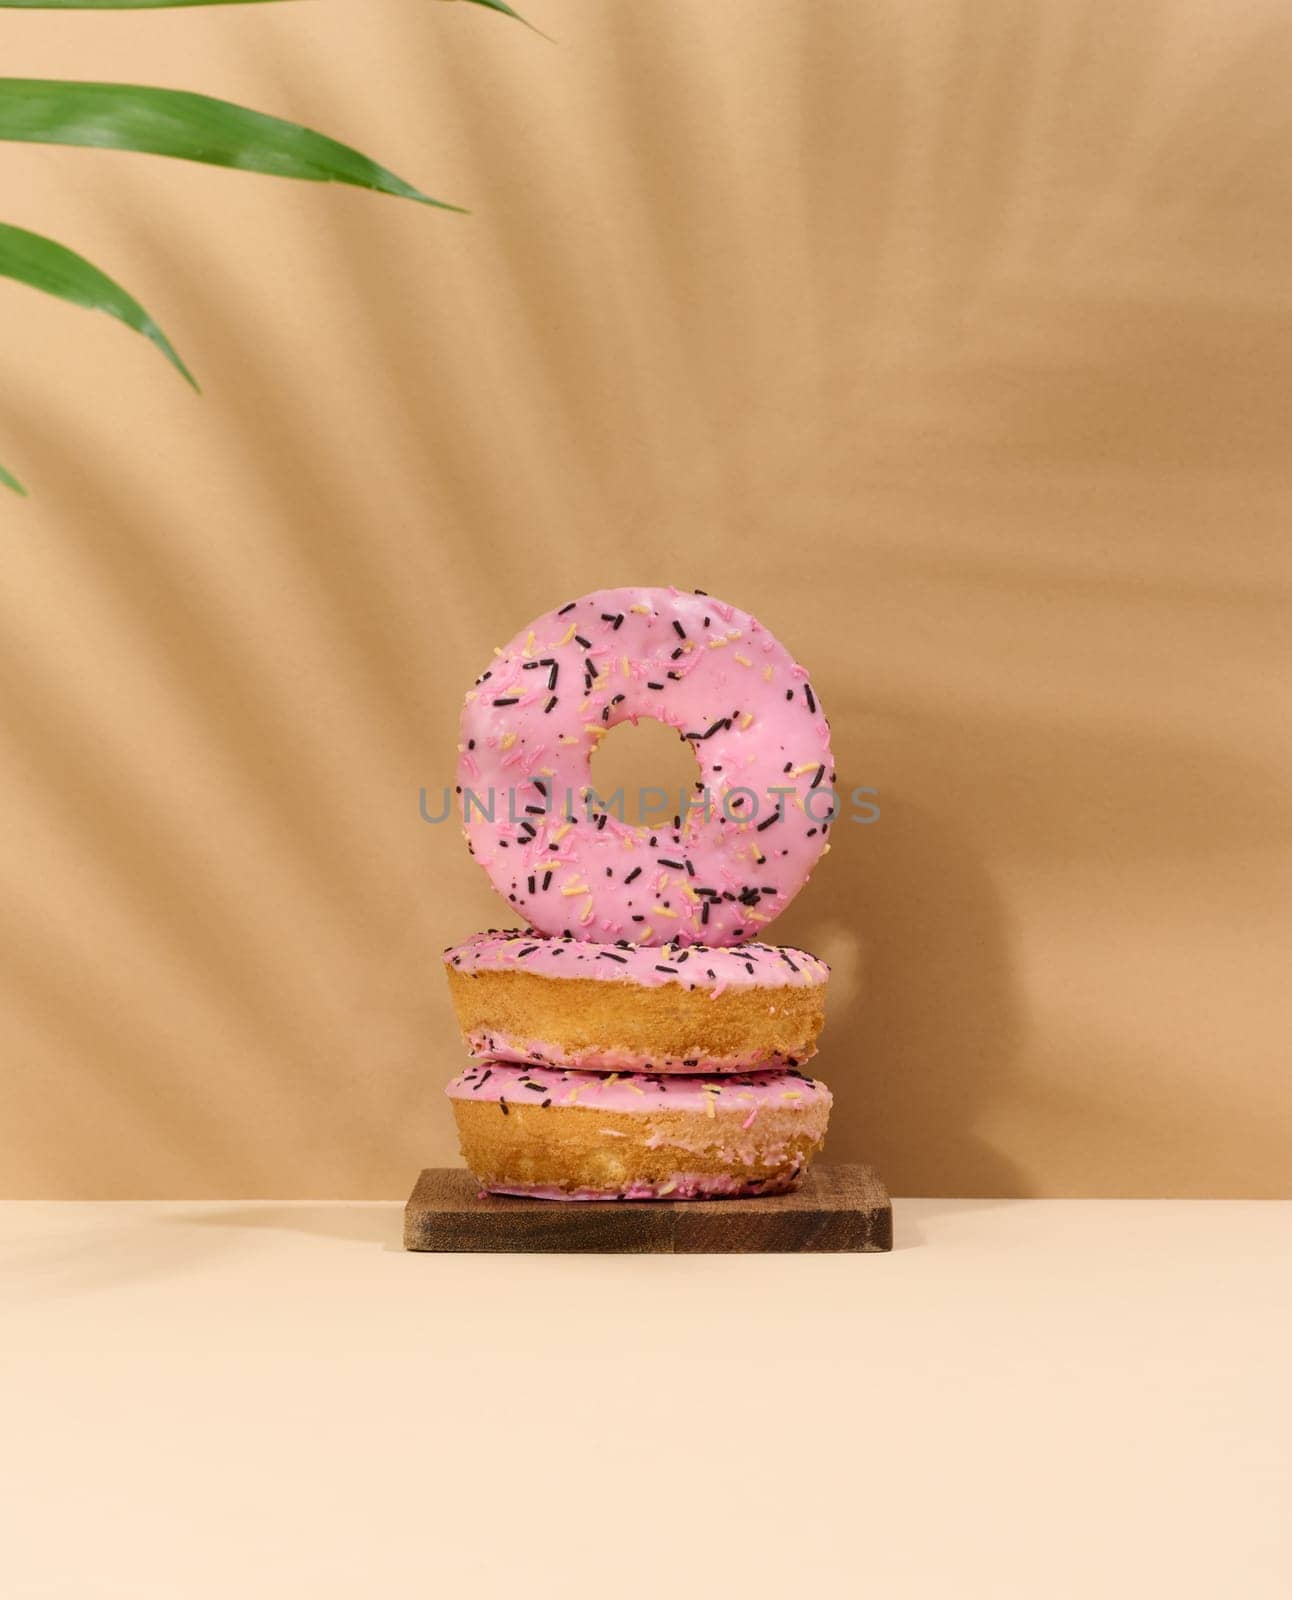 Donut covered with pink glaze and sprinkled with multi-colored sprinkles by ndanko